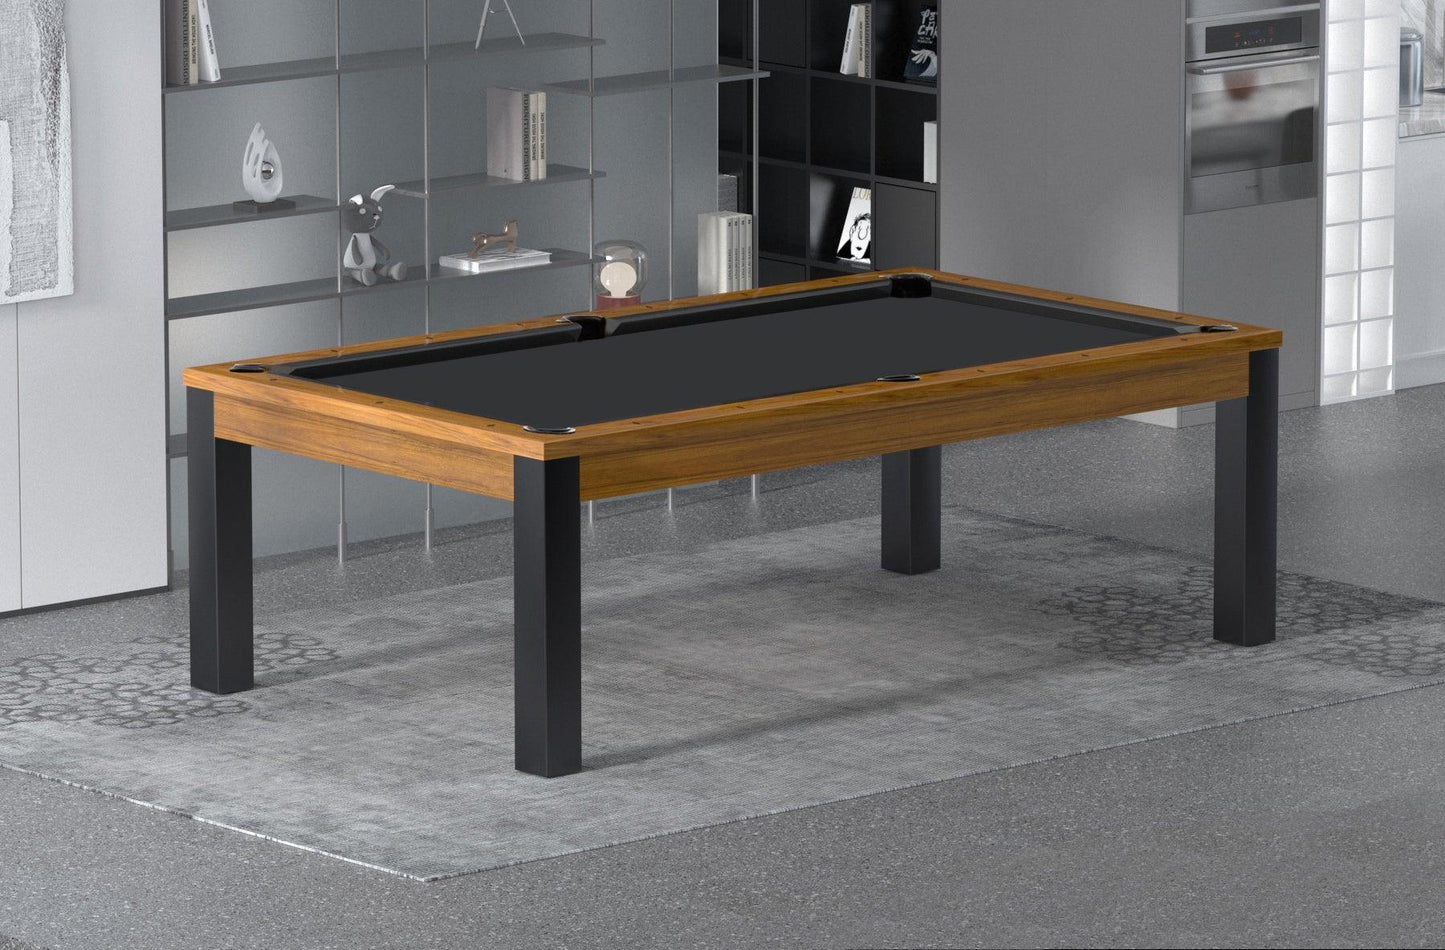 Spencer Marston Annapolis Dining Pool Table